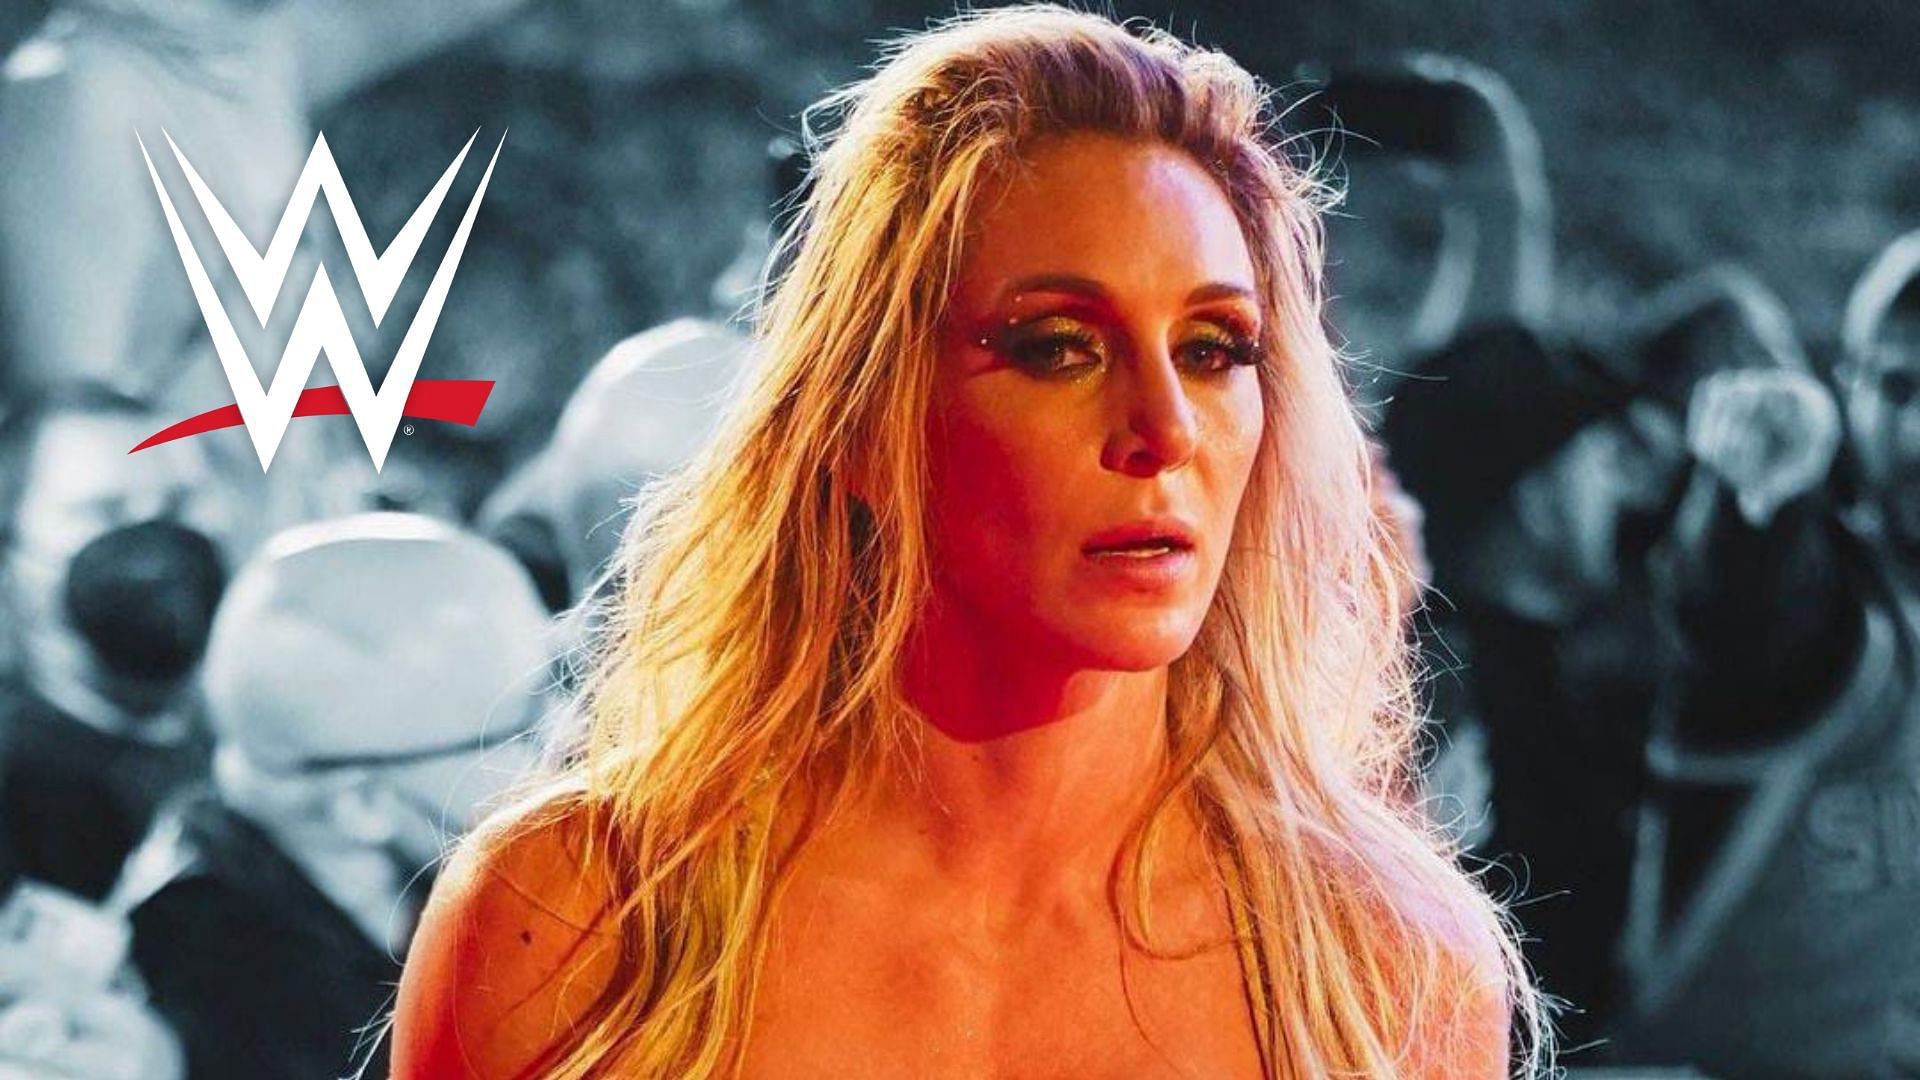 Charlotte Flair is current Smackdown Women